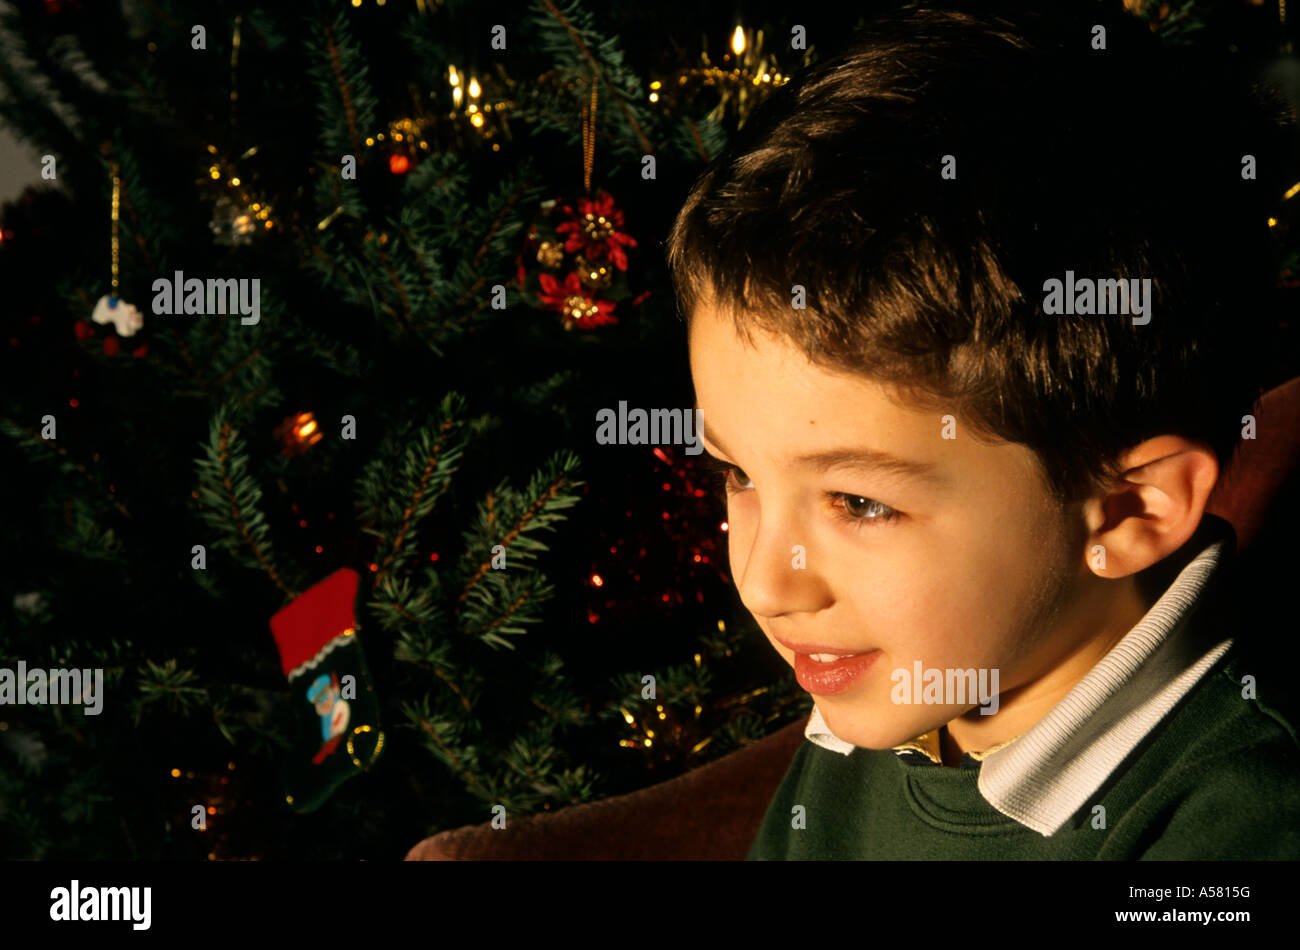 Young boy smiling next to a Christmas tree. Stock Photo